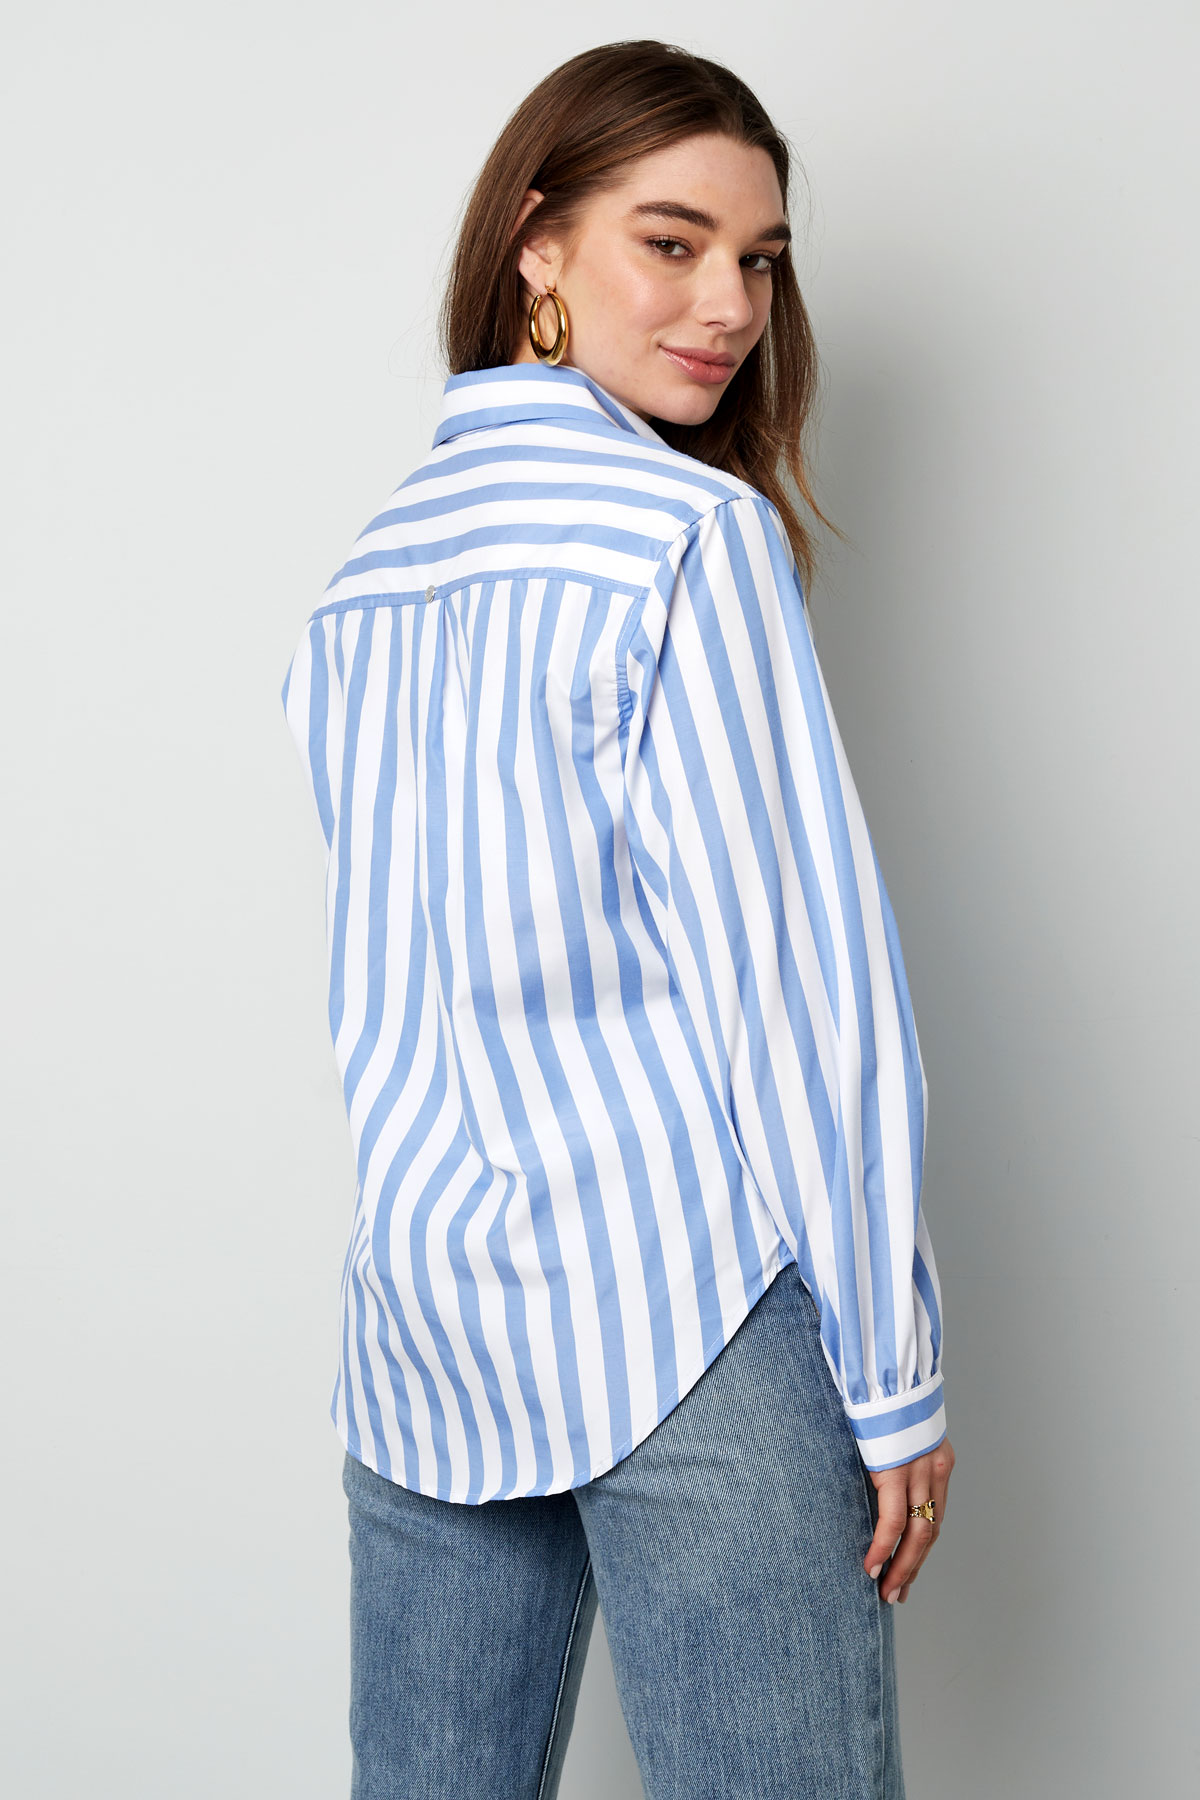 Striped casual blouse - black and white h5 Picture10